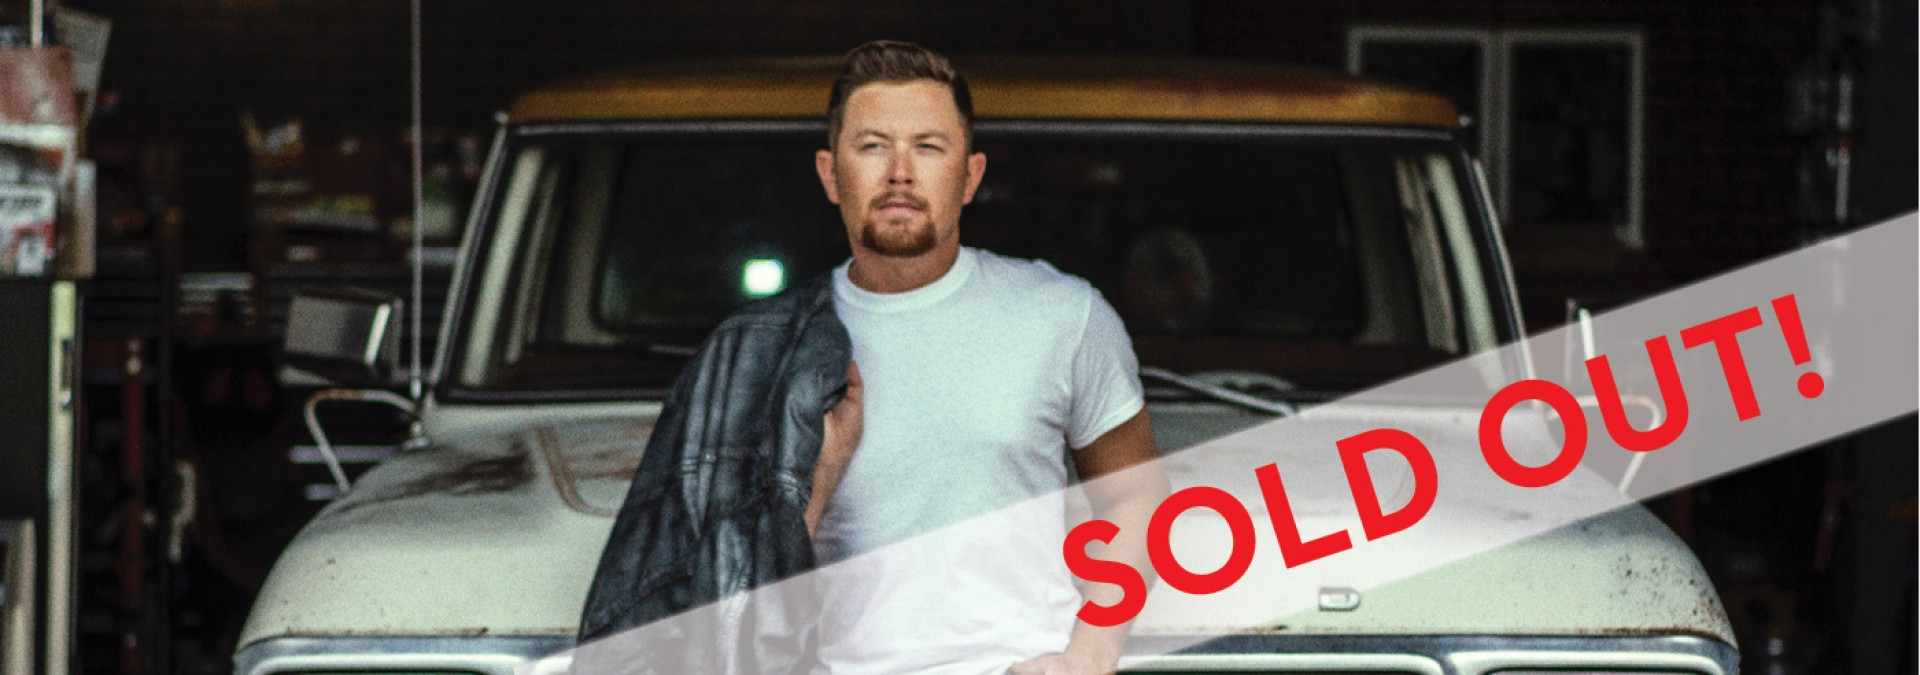 Scotty EventTicket ImageSoldOut